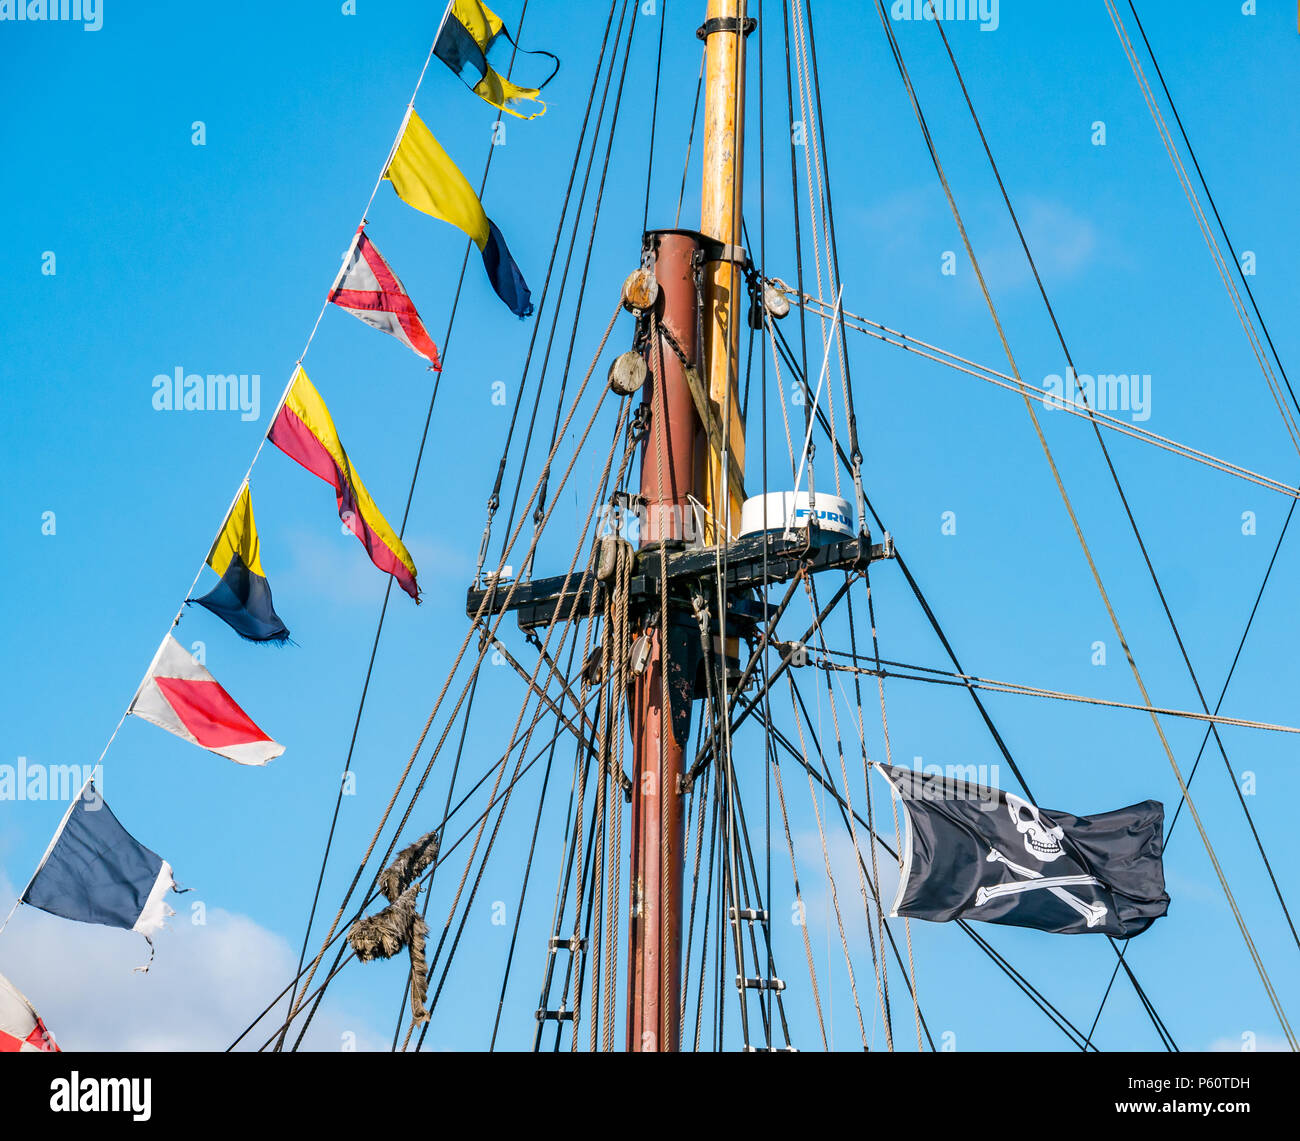 Vview of mast of sailing ship with pirate flag, pennants and radar system, Albert Dock, Liverpool, England, UK Stock Photo